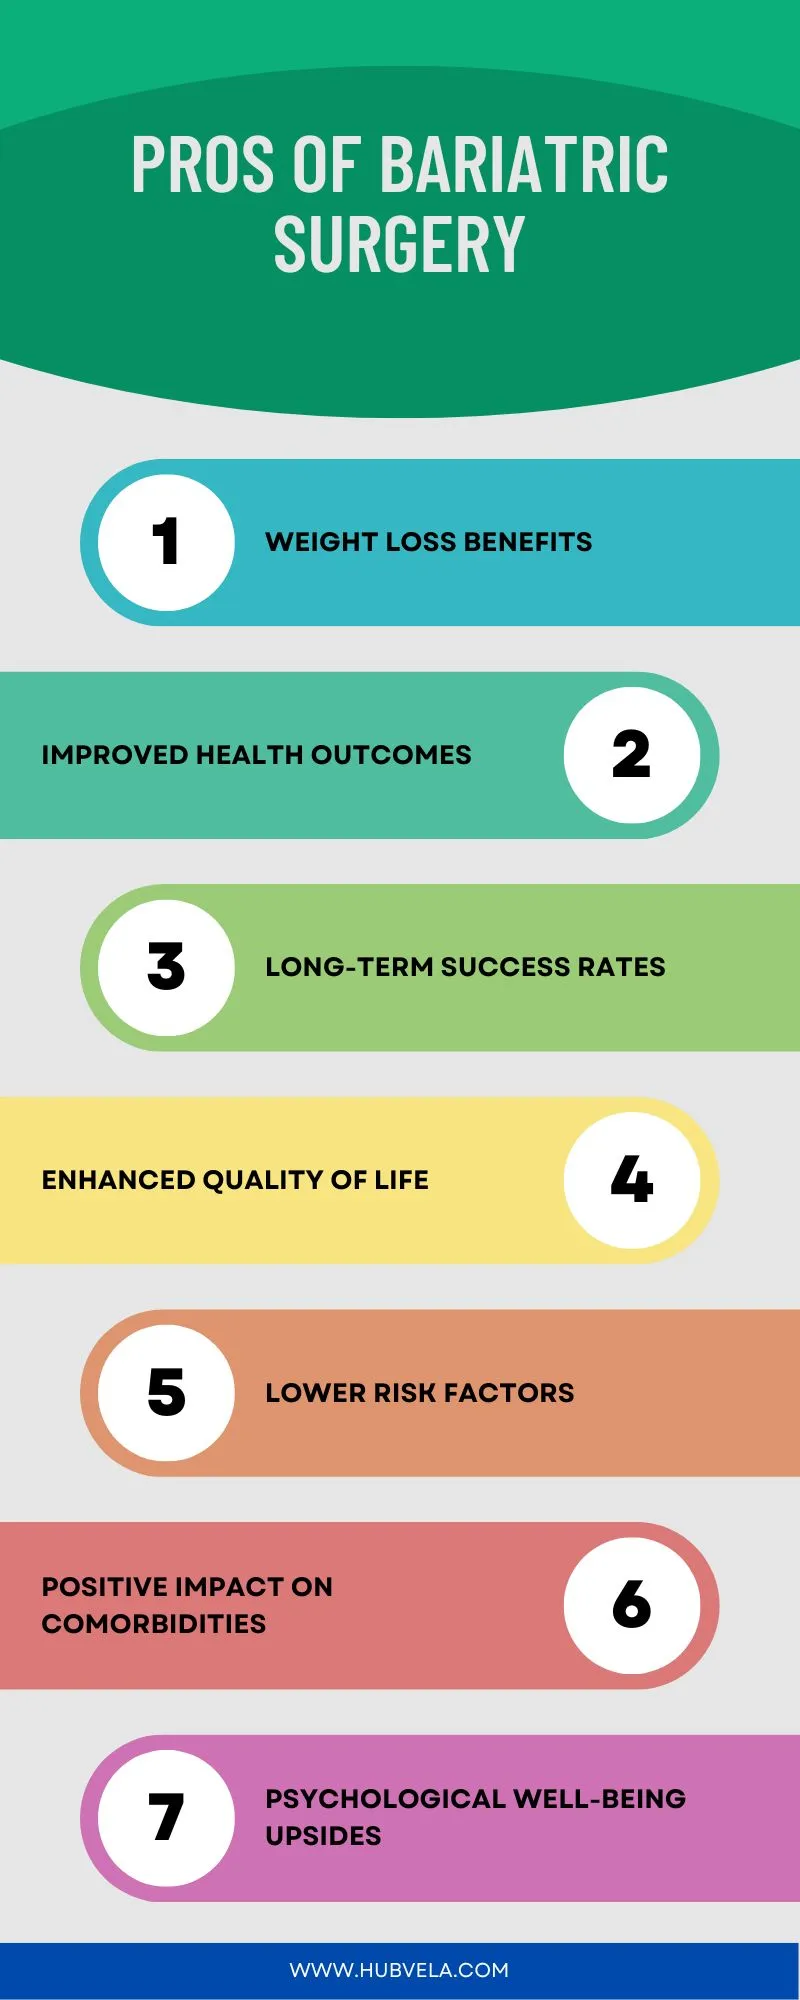 Pros Of Bariatric Surgery Infographic